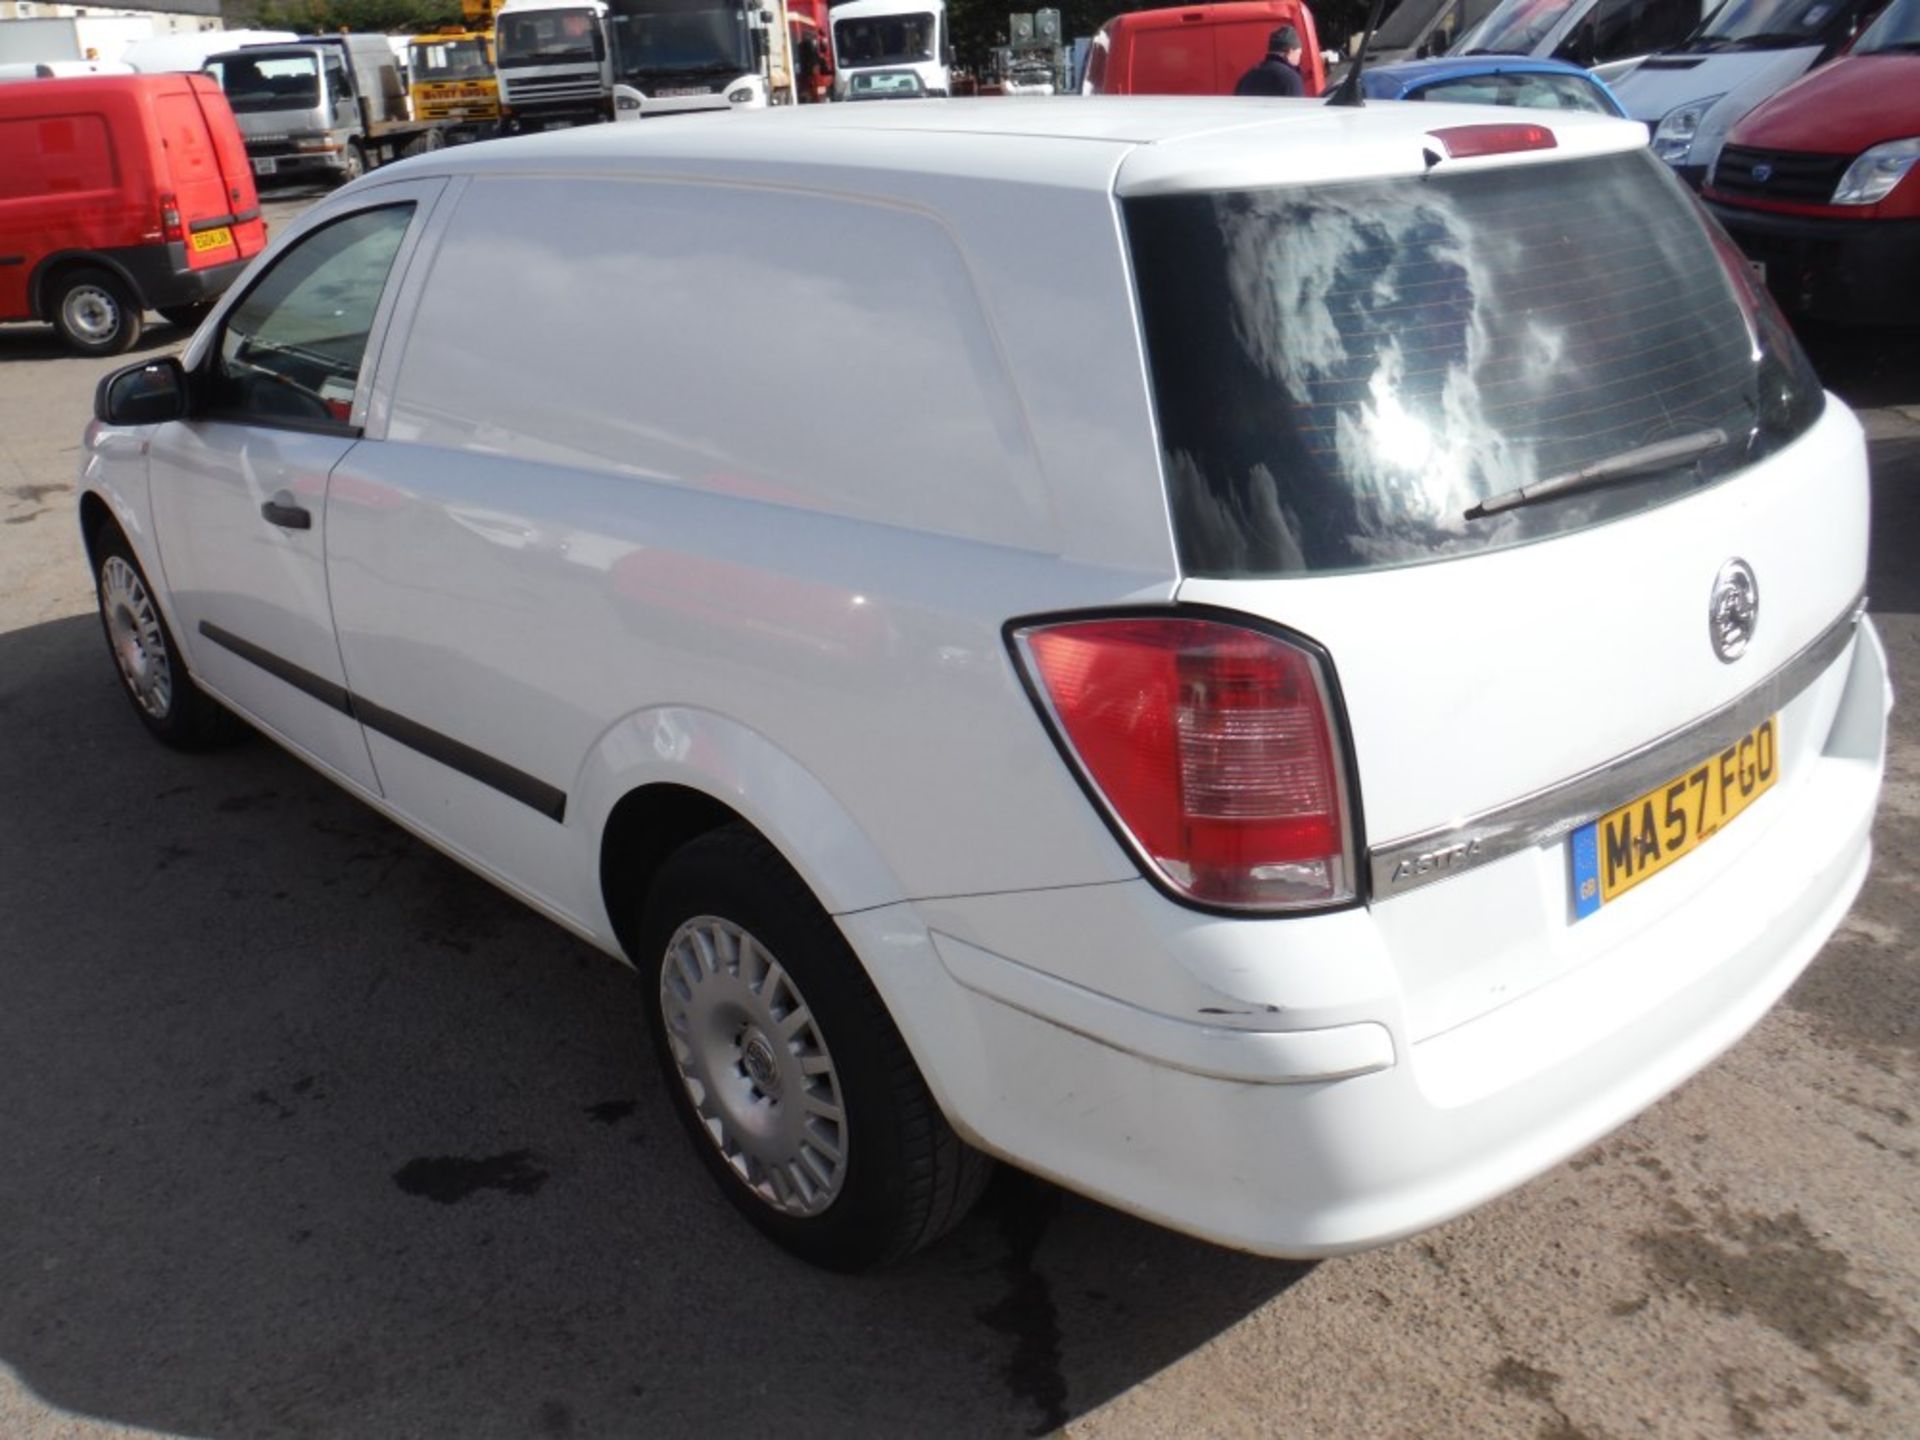 57 reg VAUXHALL ASTRA CLUB CDTI VAN, 1ST REG 10/07, TEST 06/15, 154410M, V5 HERE, 1 OWNER FROM - Image 3 of 5